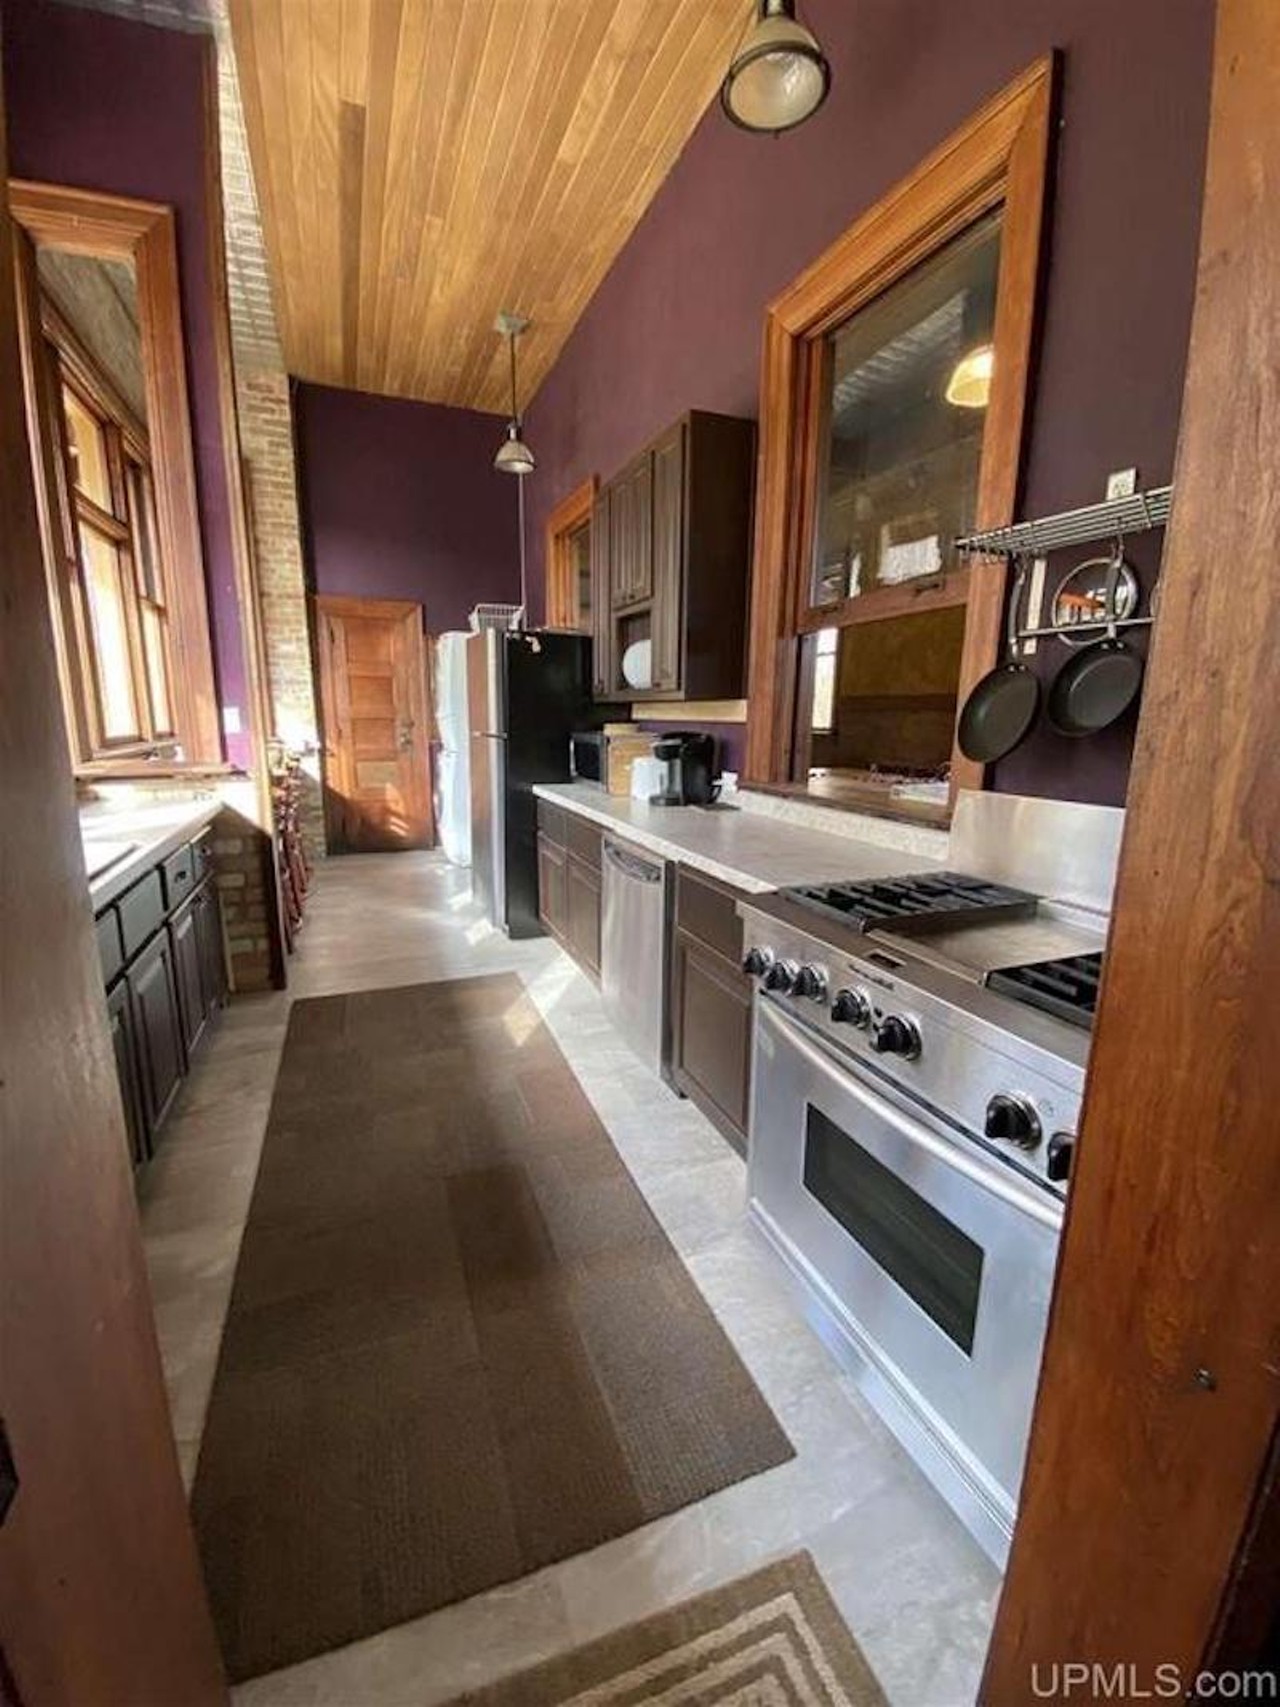 You can now live in a historic train depot in the U.P. for $324.9k